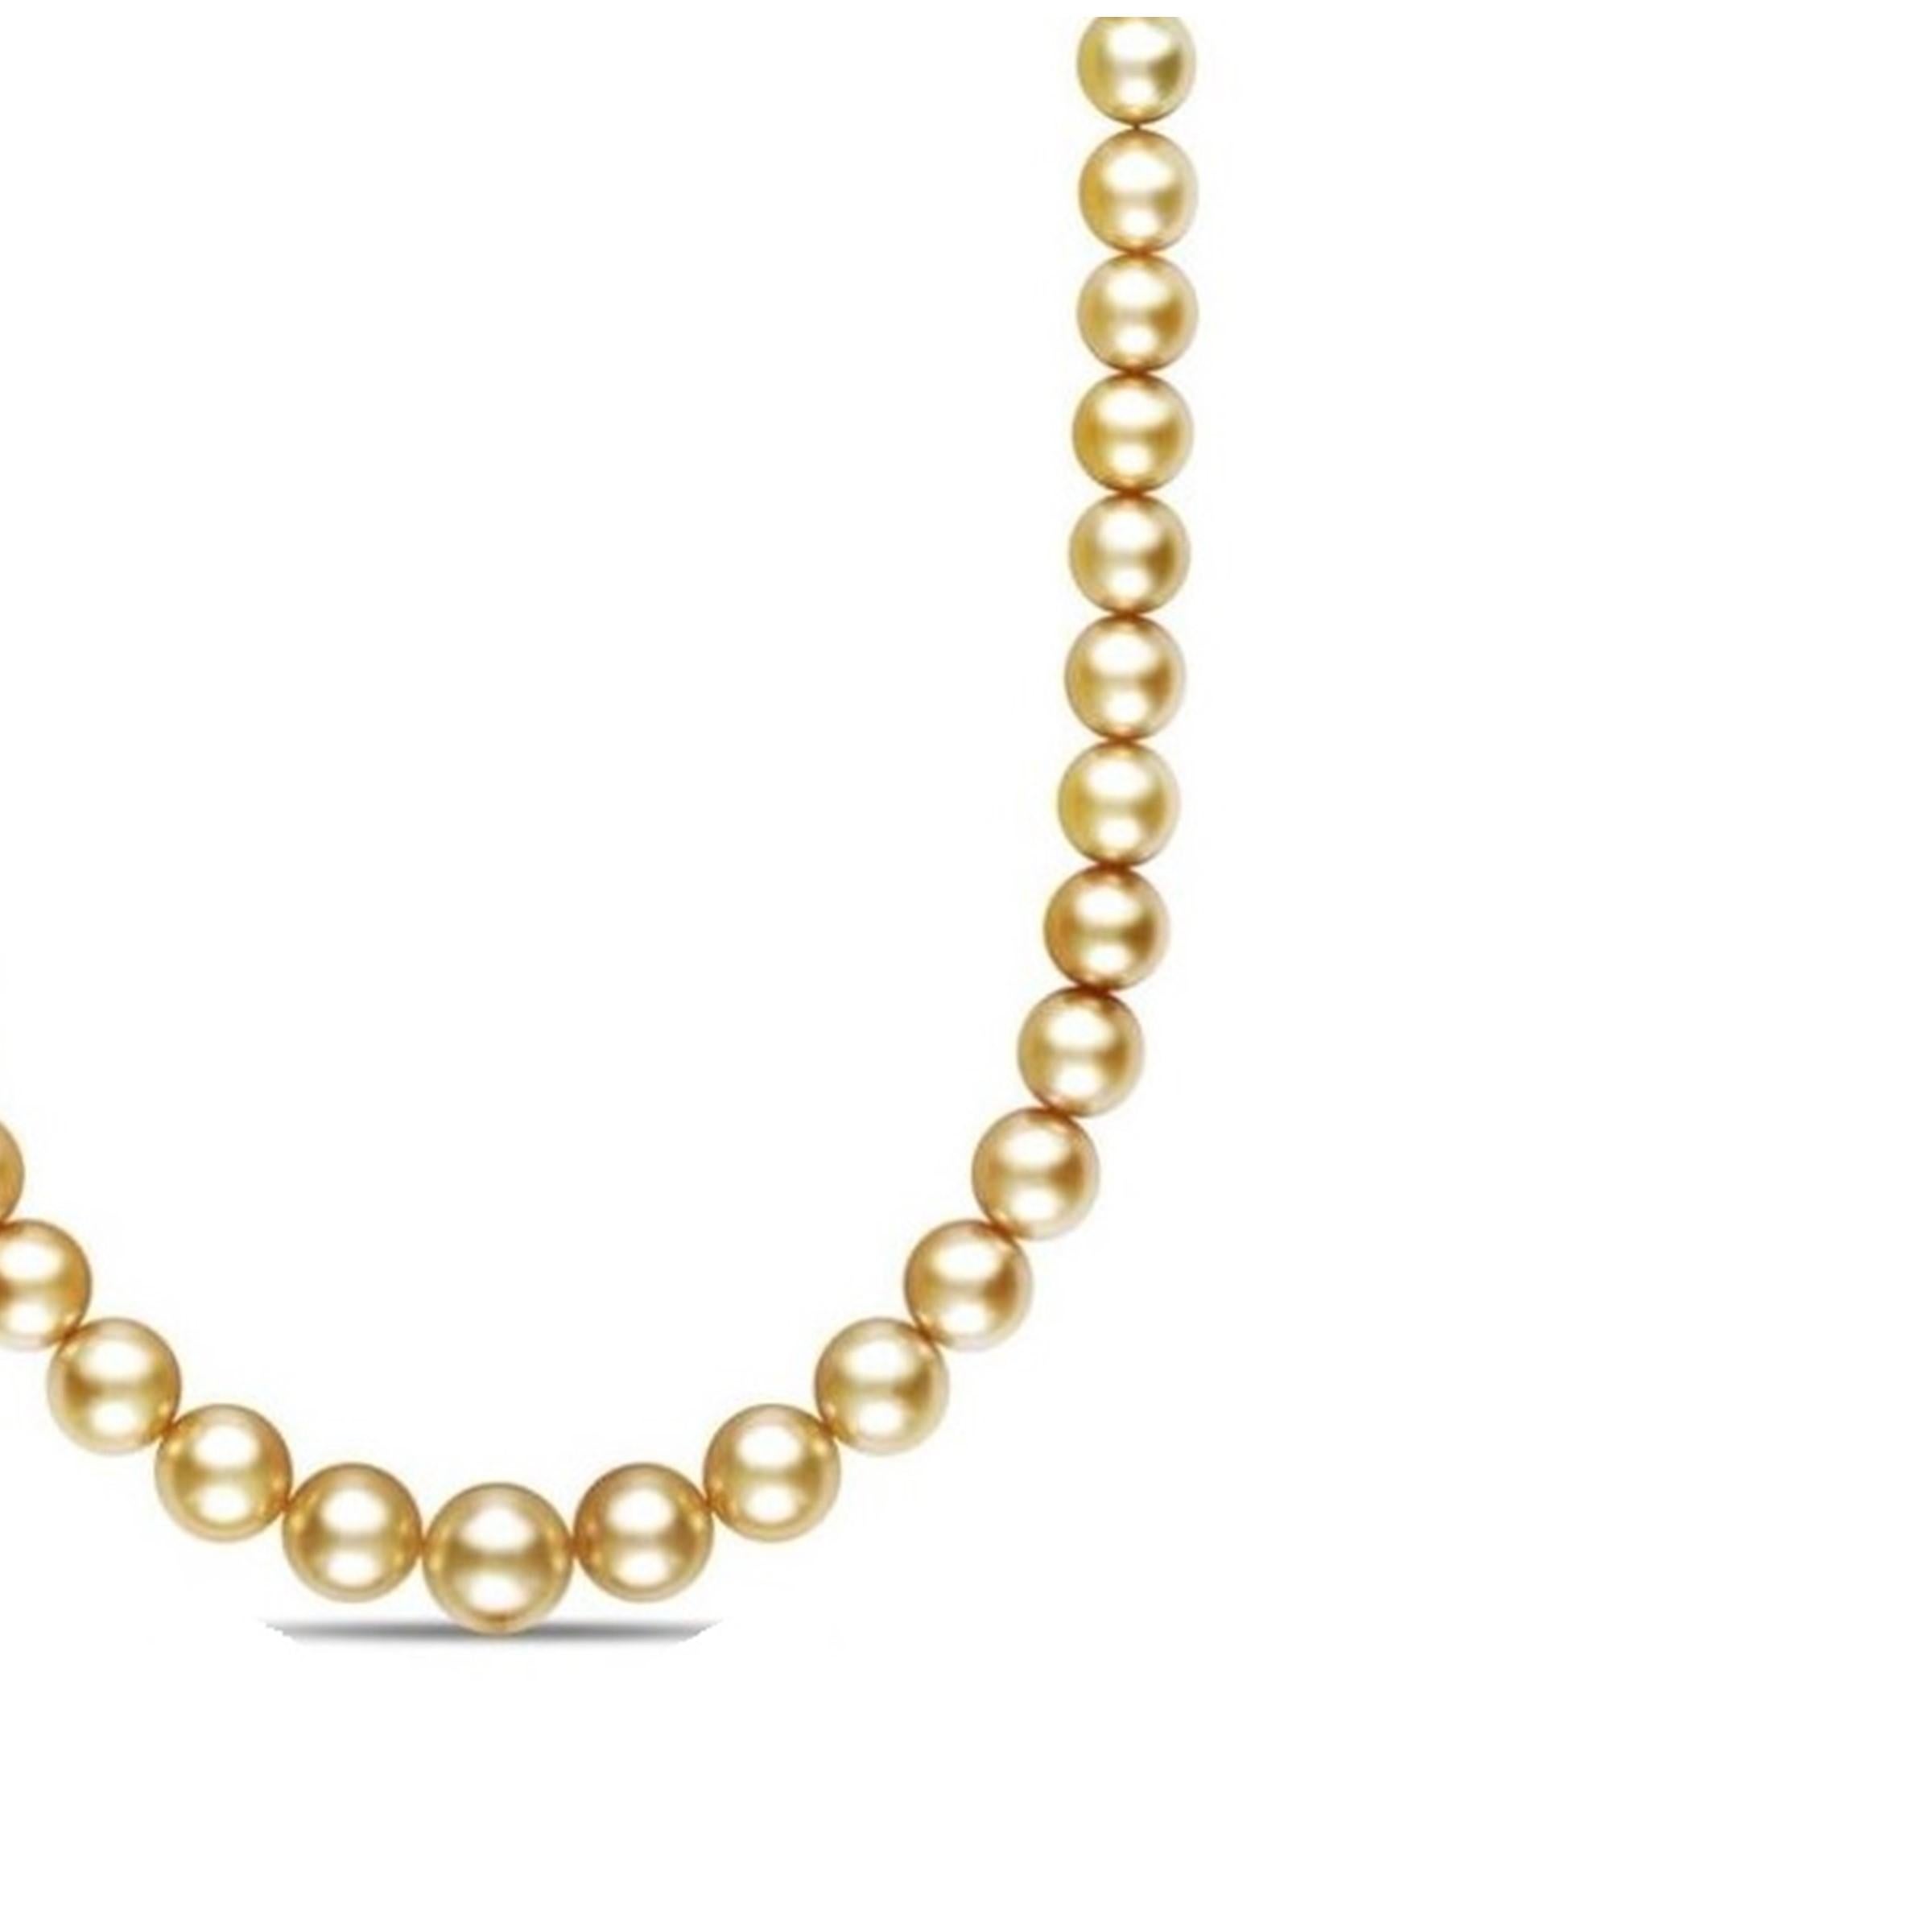 AAA Quality Golden South Sea Pearl Necklace with White Gold Diamond Studded Clasp

This exquisite golden south sea graduated pearl necklace features 8.0-11.0mm, AAA quality pearls hand-picked for their radiant luster. 
This princess length necklace 